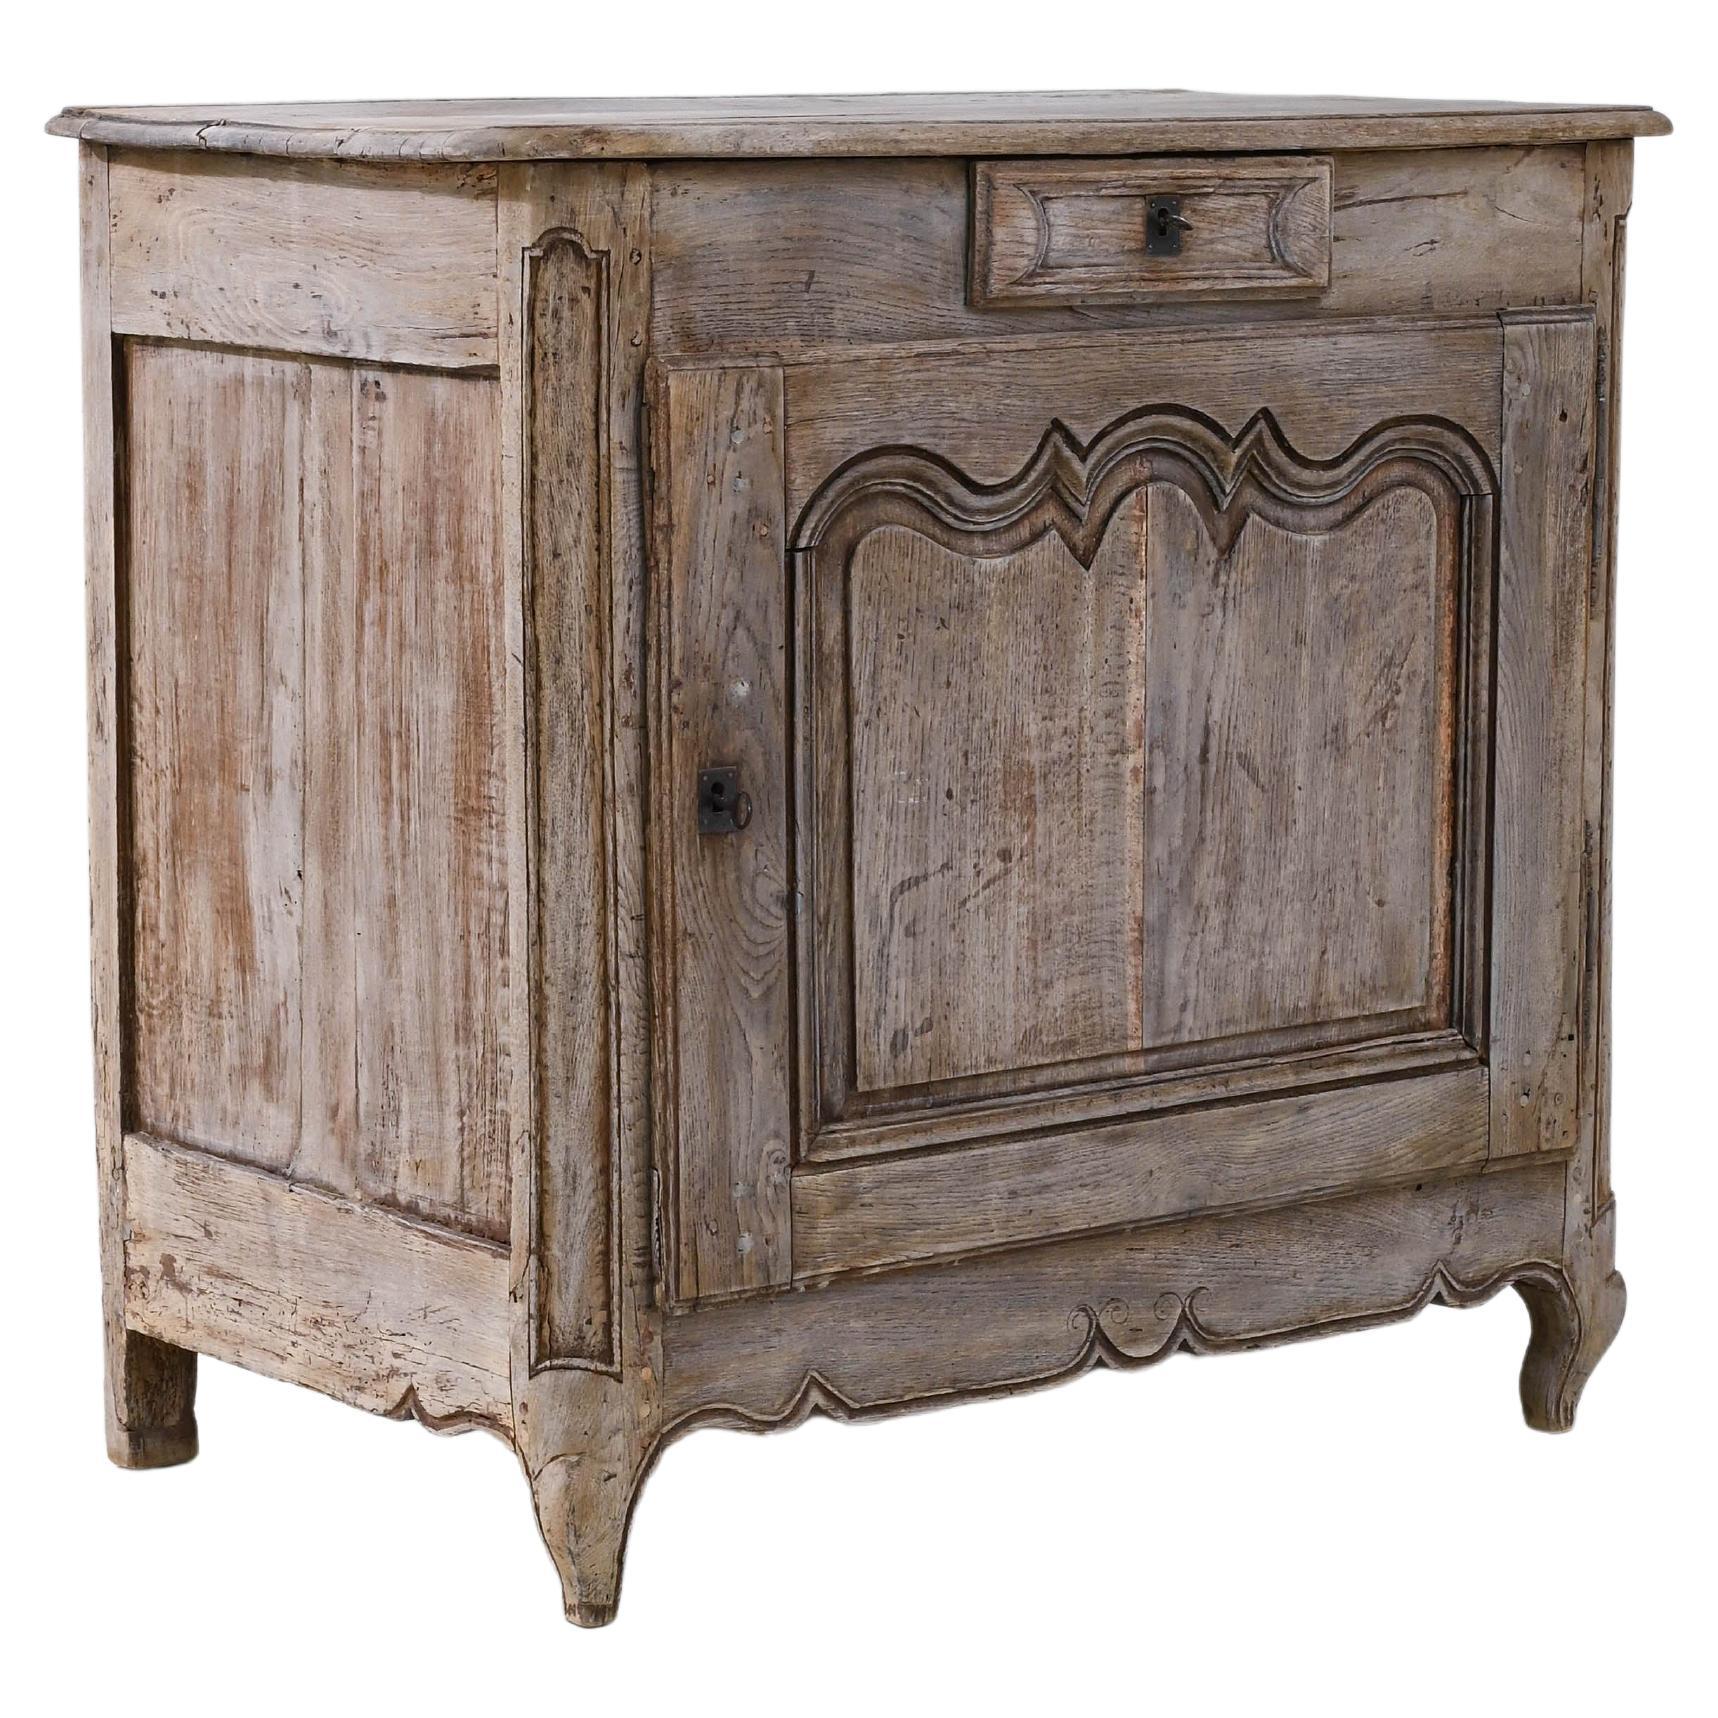 Early 19th Century French Bleached Oak Buffet